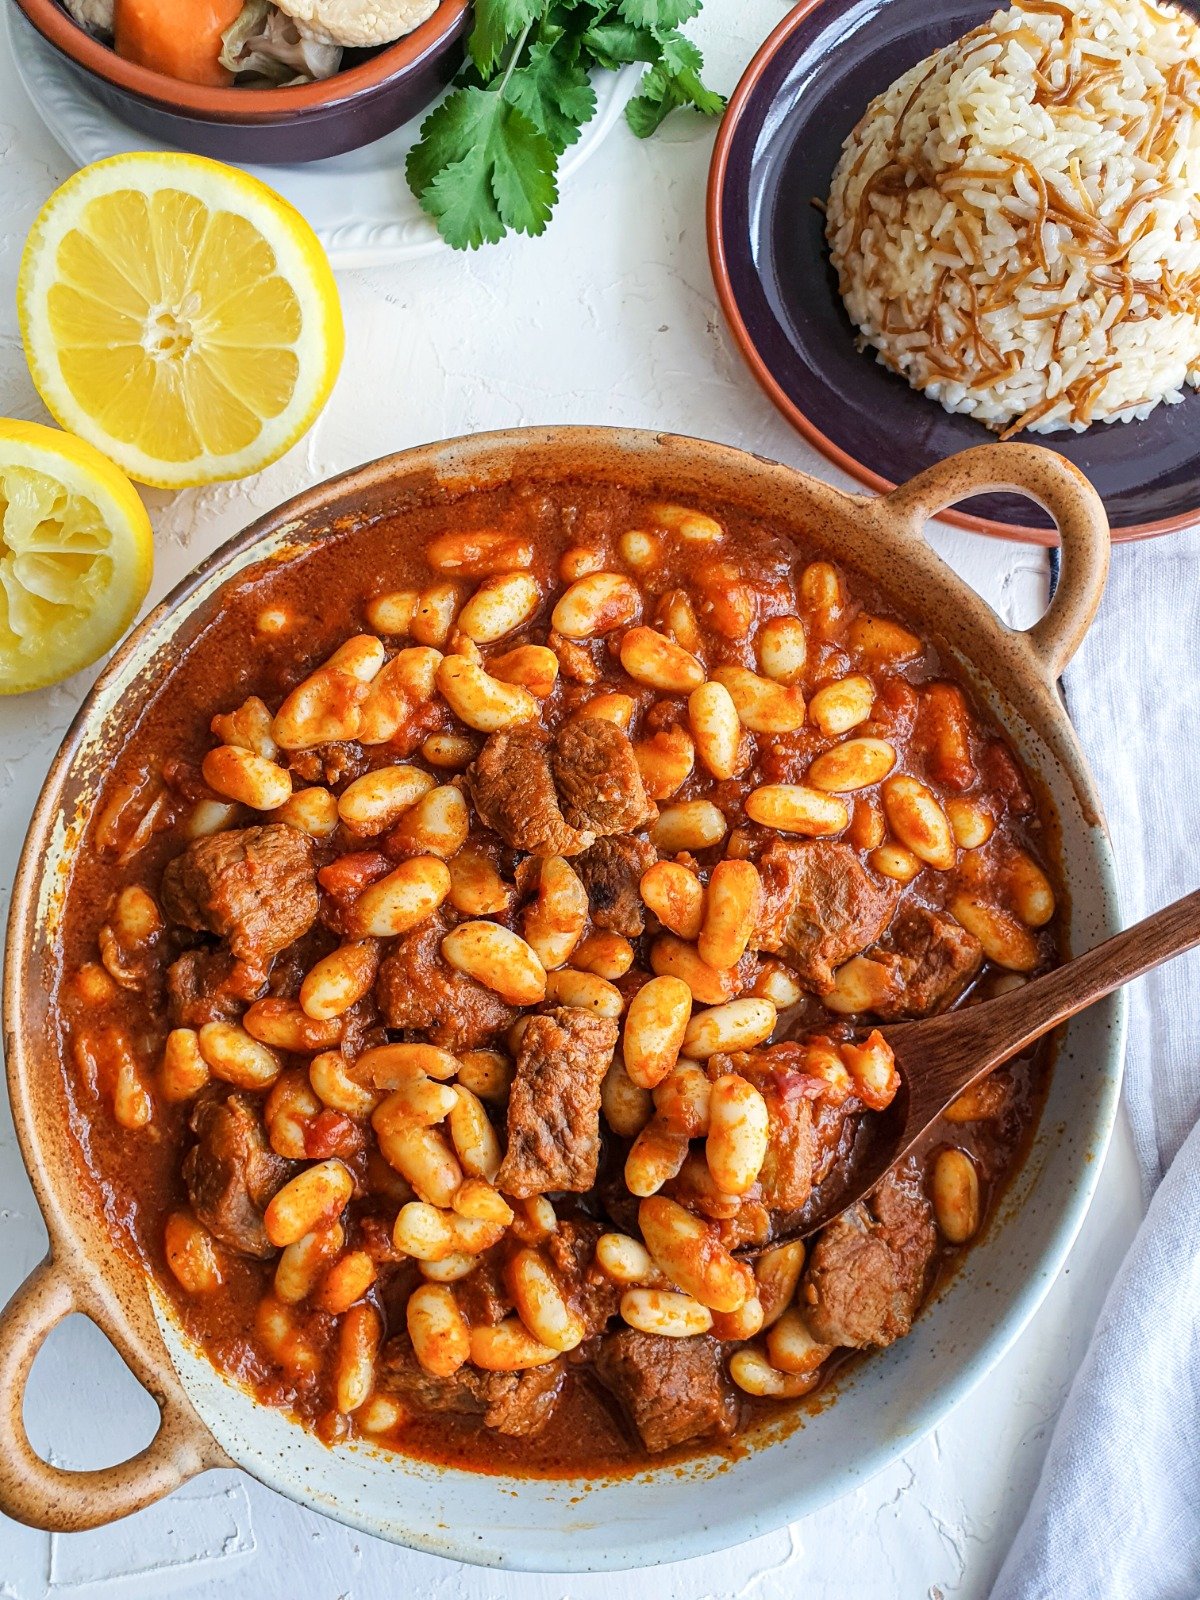 A heart warming stew that is loved and cherished throughout Turkey and the Middle East.
